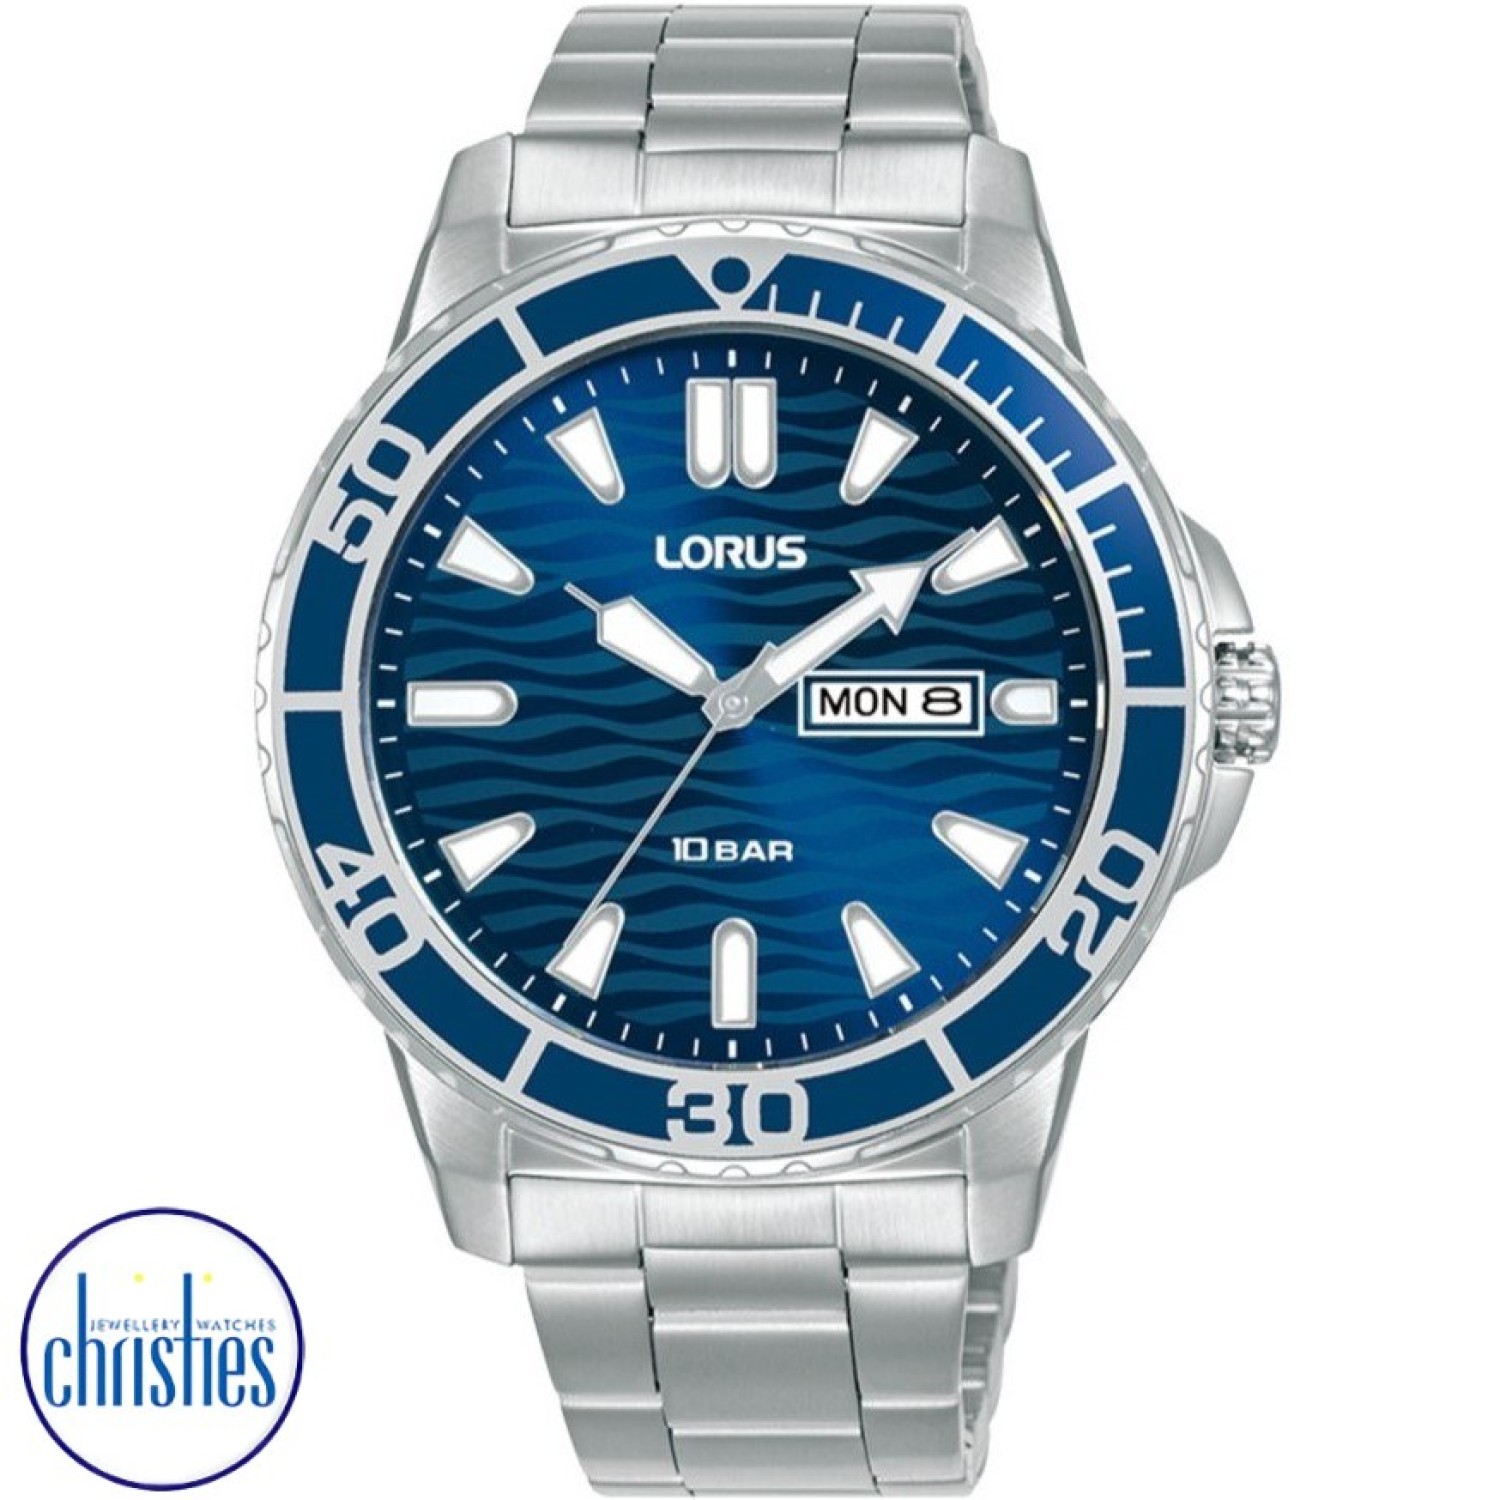 RH357AX9 Lorus Gents Sports Quartz RH357AX9 Lorus by Seiko Auckland s offers a diverse range of watch styles, including analog, digital, sports, and dress watches..